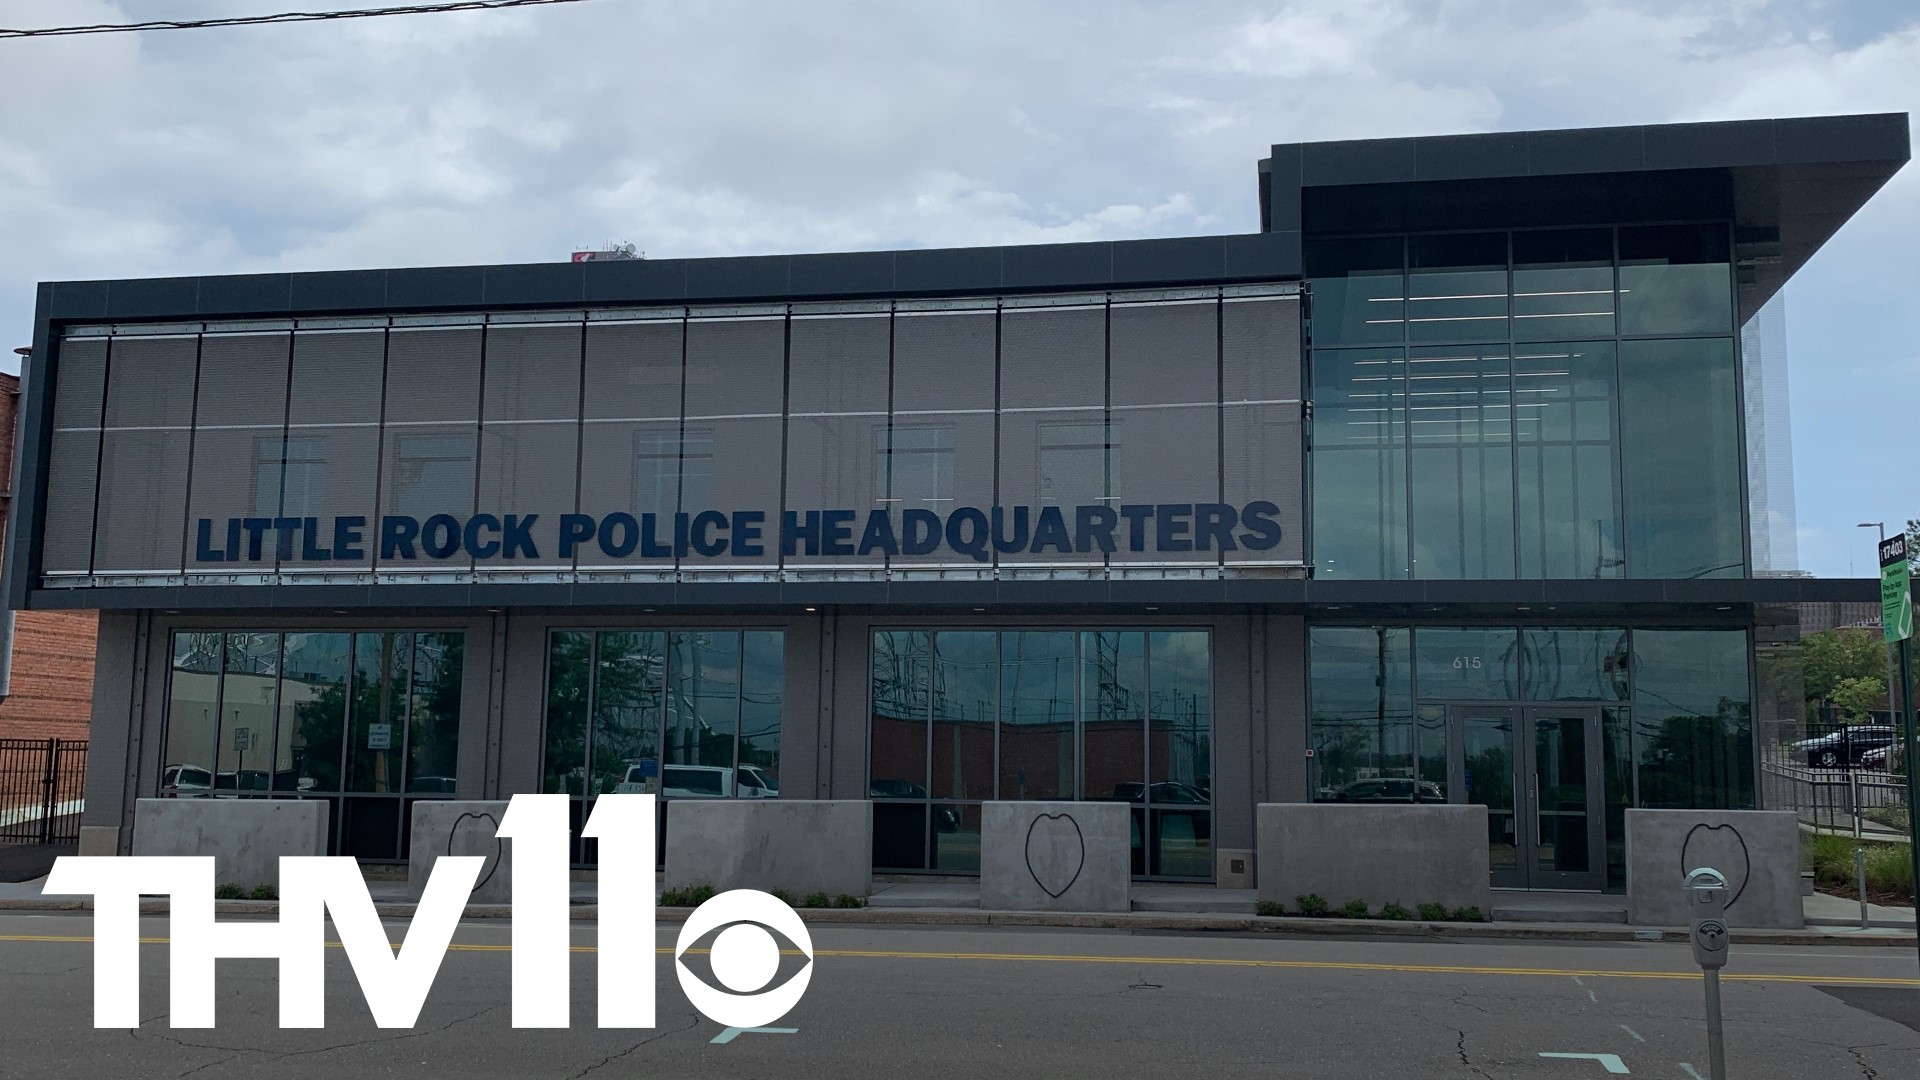 The Little Rock Police Department has unveiled its new almost $7 million headquarters decked out with plenty of upgraded and updated technology.